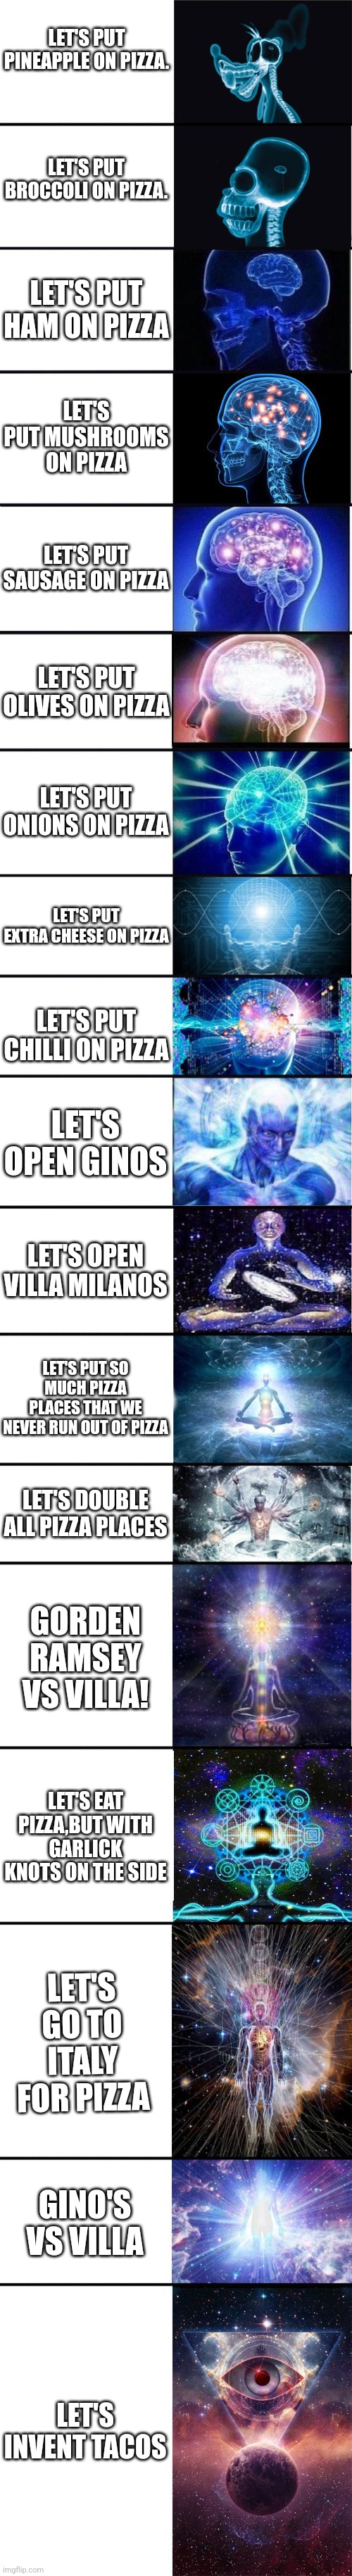 expanding brain: 9001 | LET'S PUT PINEAPPLE ON PIZZA. LET'S PUT BROCCOLI ON PIZZA. LET'S PUT HAM ON PIZZA; LET'S PUT MUSHROOMS ON PIZZA; LET'S PUT SAUSAGE ON PIZZA; LET'S PUT OLIVES ON PIZZA; LET'S PUT ONIONS ON PIZZA; LET'S PUT EXTRA CHEESE ON PIZZA; LET'S PUT CHILLI ON PIZZA; LET'S OPEN GINOS; LET'S OPEN VILLA MILANOS; LET'S PUT SO MUCH PIZZA PLACES THAT WE NEVER RUN OUT OF PIZZA; LET'S DOUBLE ALL PIZZA PLACES; GORDEN RAMSEY VS VILLA! LET'S EAT PIZZA,BUT WITH GARLICK KNOTS ON THE SIDE; LET'S GO TO ITALY FOR PIZZA; GINO'S VS VILLA; LET'S INVENT TACOS | image tagged in expanding brain 9001 | made w/ Imgflip meme maker